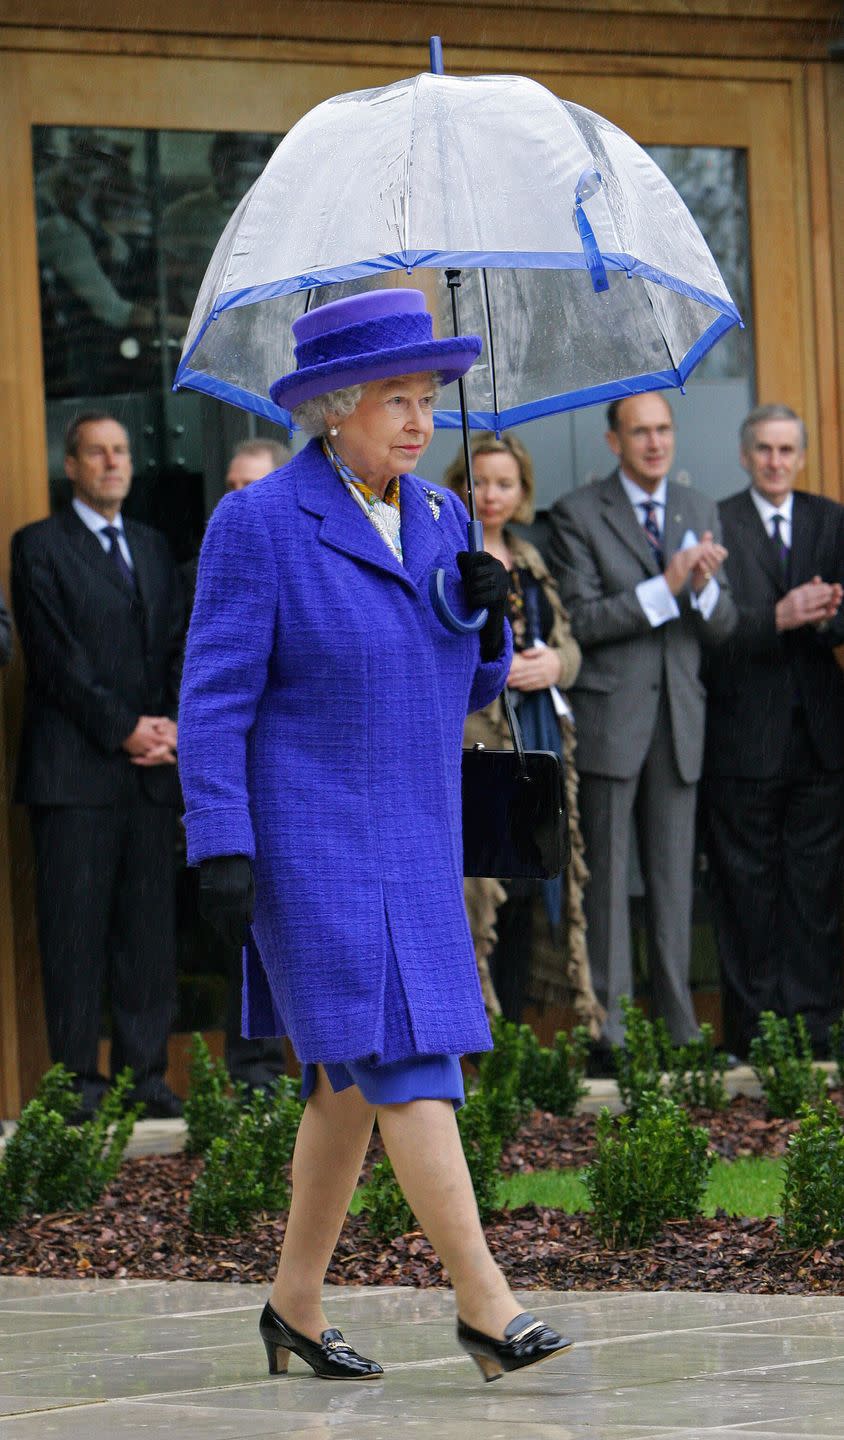 <p>Queen Elizabeth is the OG of monochrome and has been rocking the look *long* before it was trending. We'd expect nothing less from the woman who even has <a href="https://www.townandcountrymag.com/society/tradition/a26899647/queen-elizabeth-umbrellas-fulton-match-outfit/" rel="nofollow noopener" target="_blank" data-ylk="slk:custom umbrellas" class="link ">custom umbrellas</a> to match her outfits. </p>